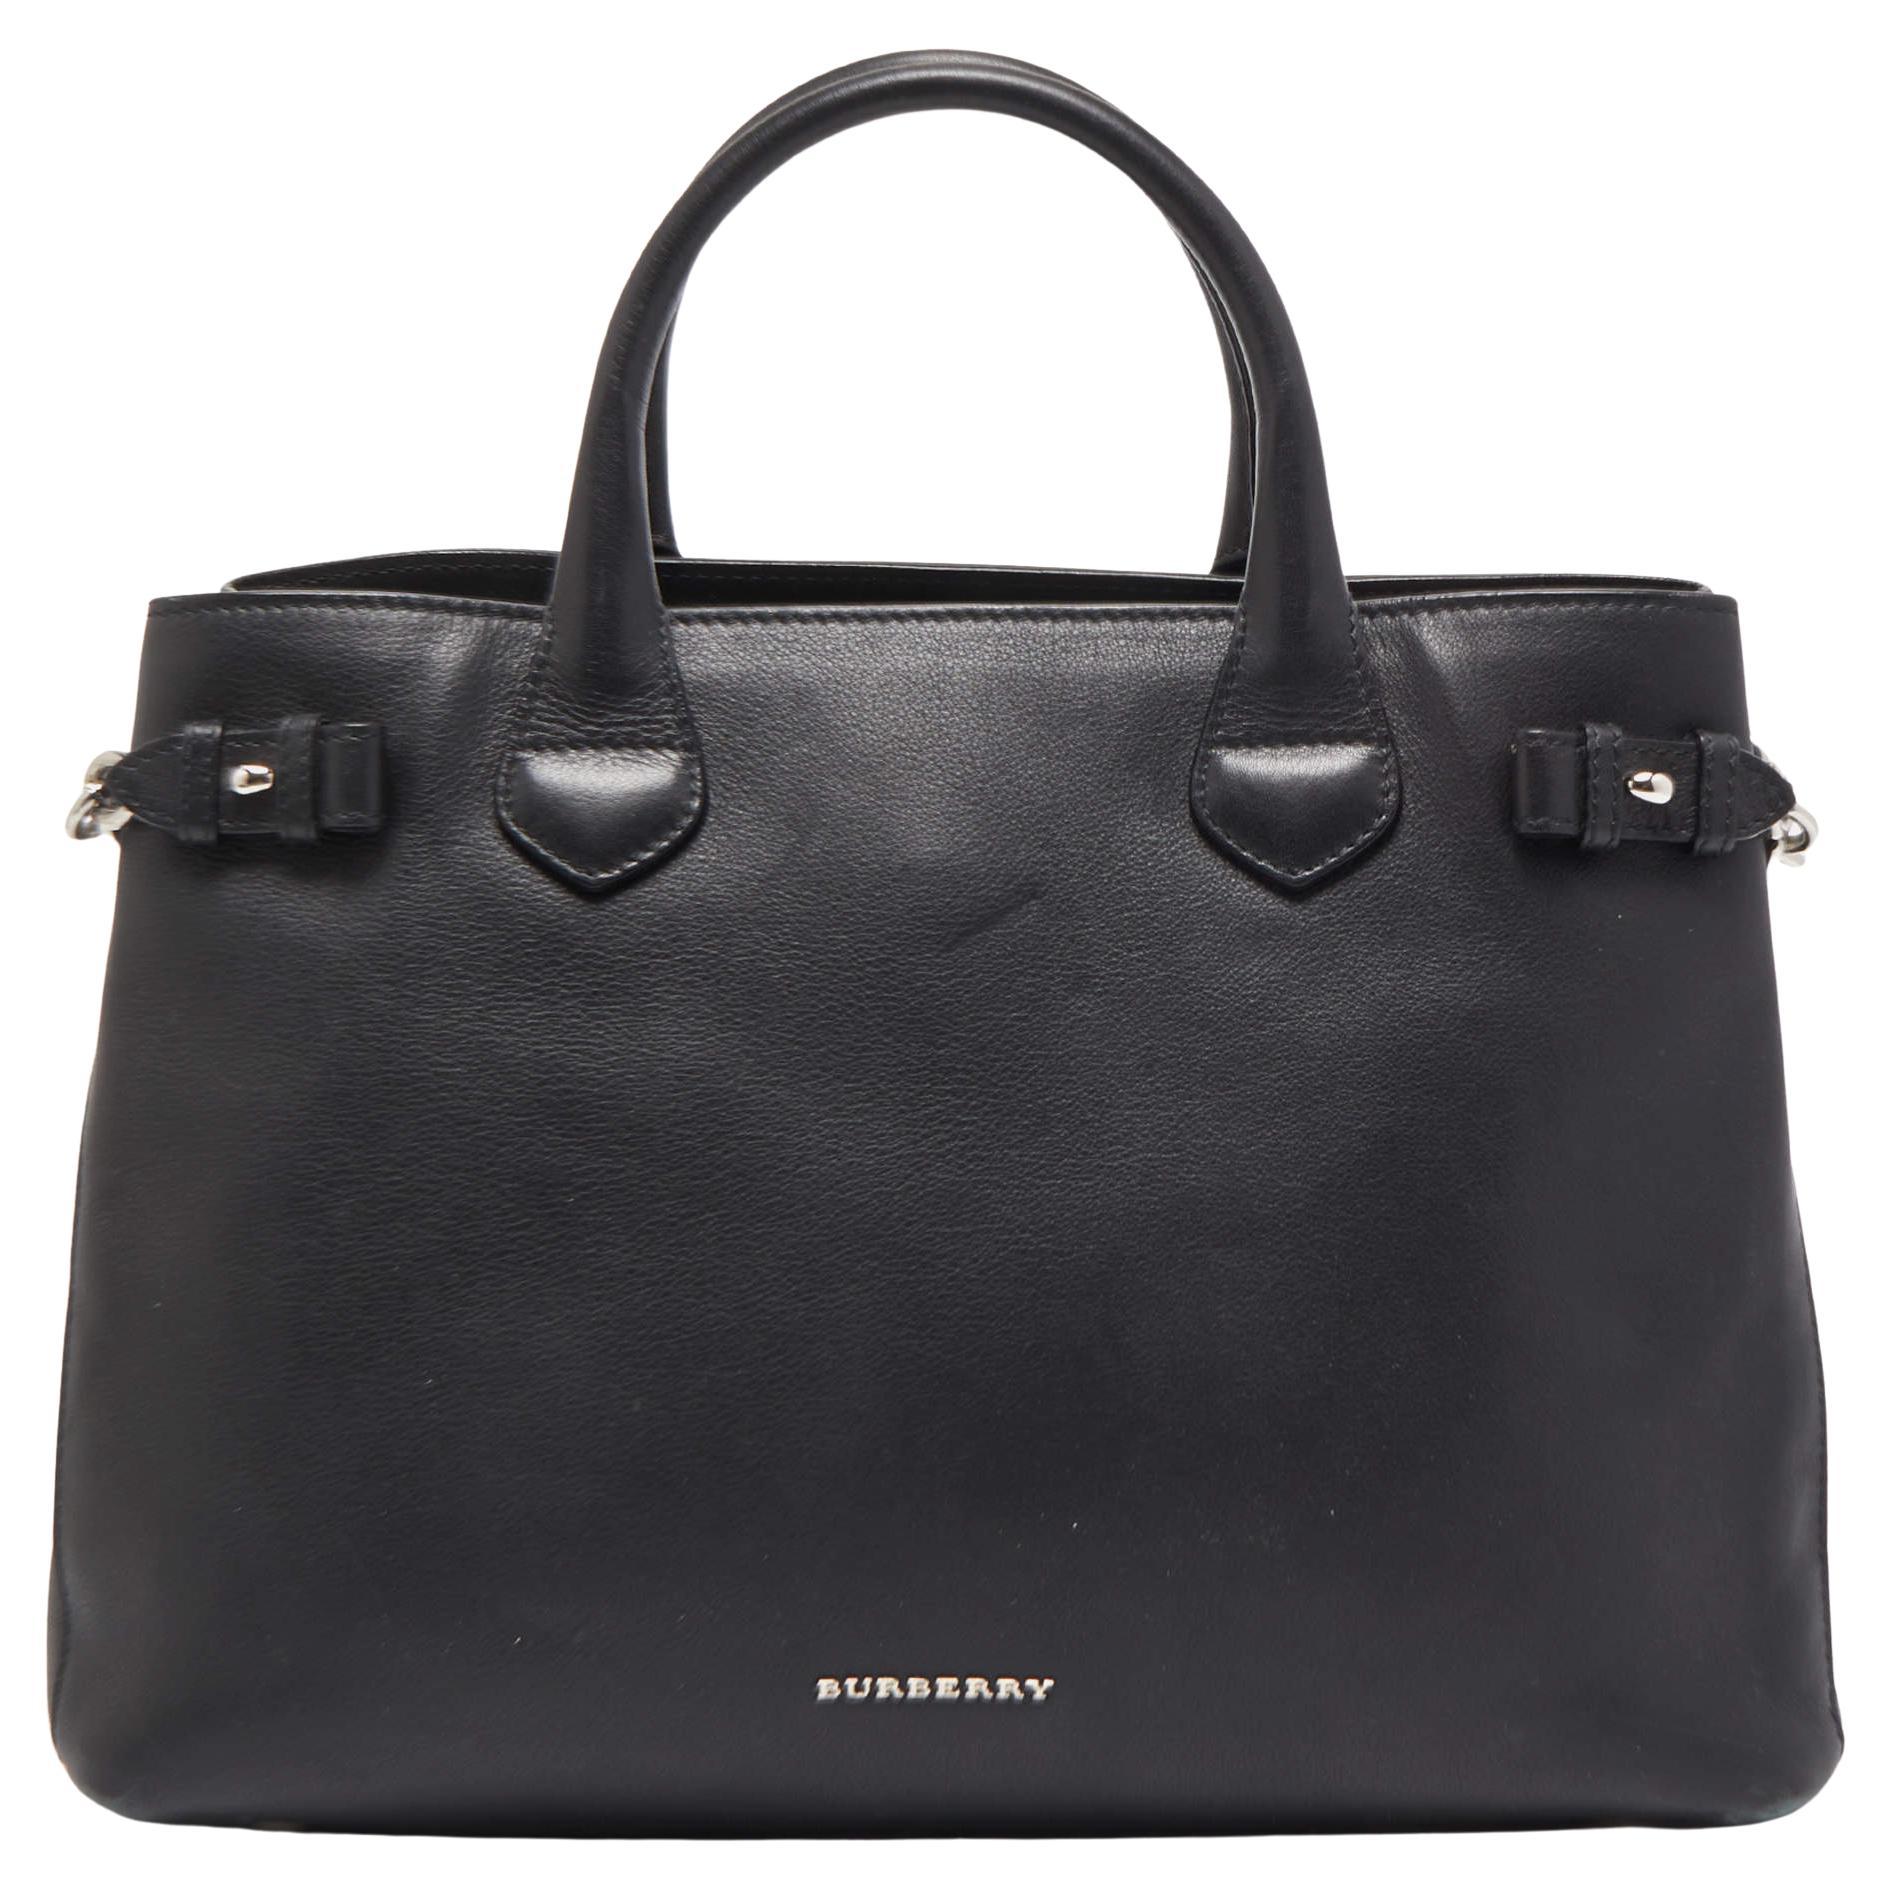 Burberry Black Leather Chain Banner Tote